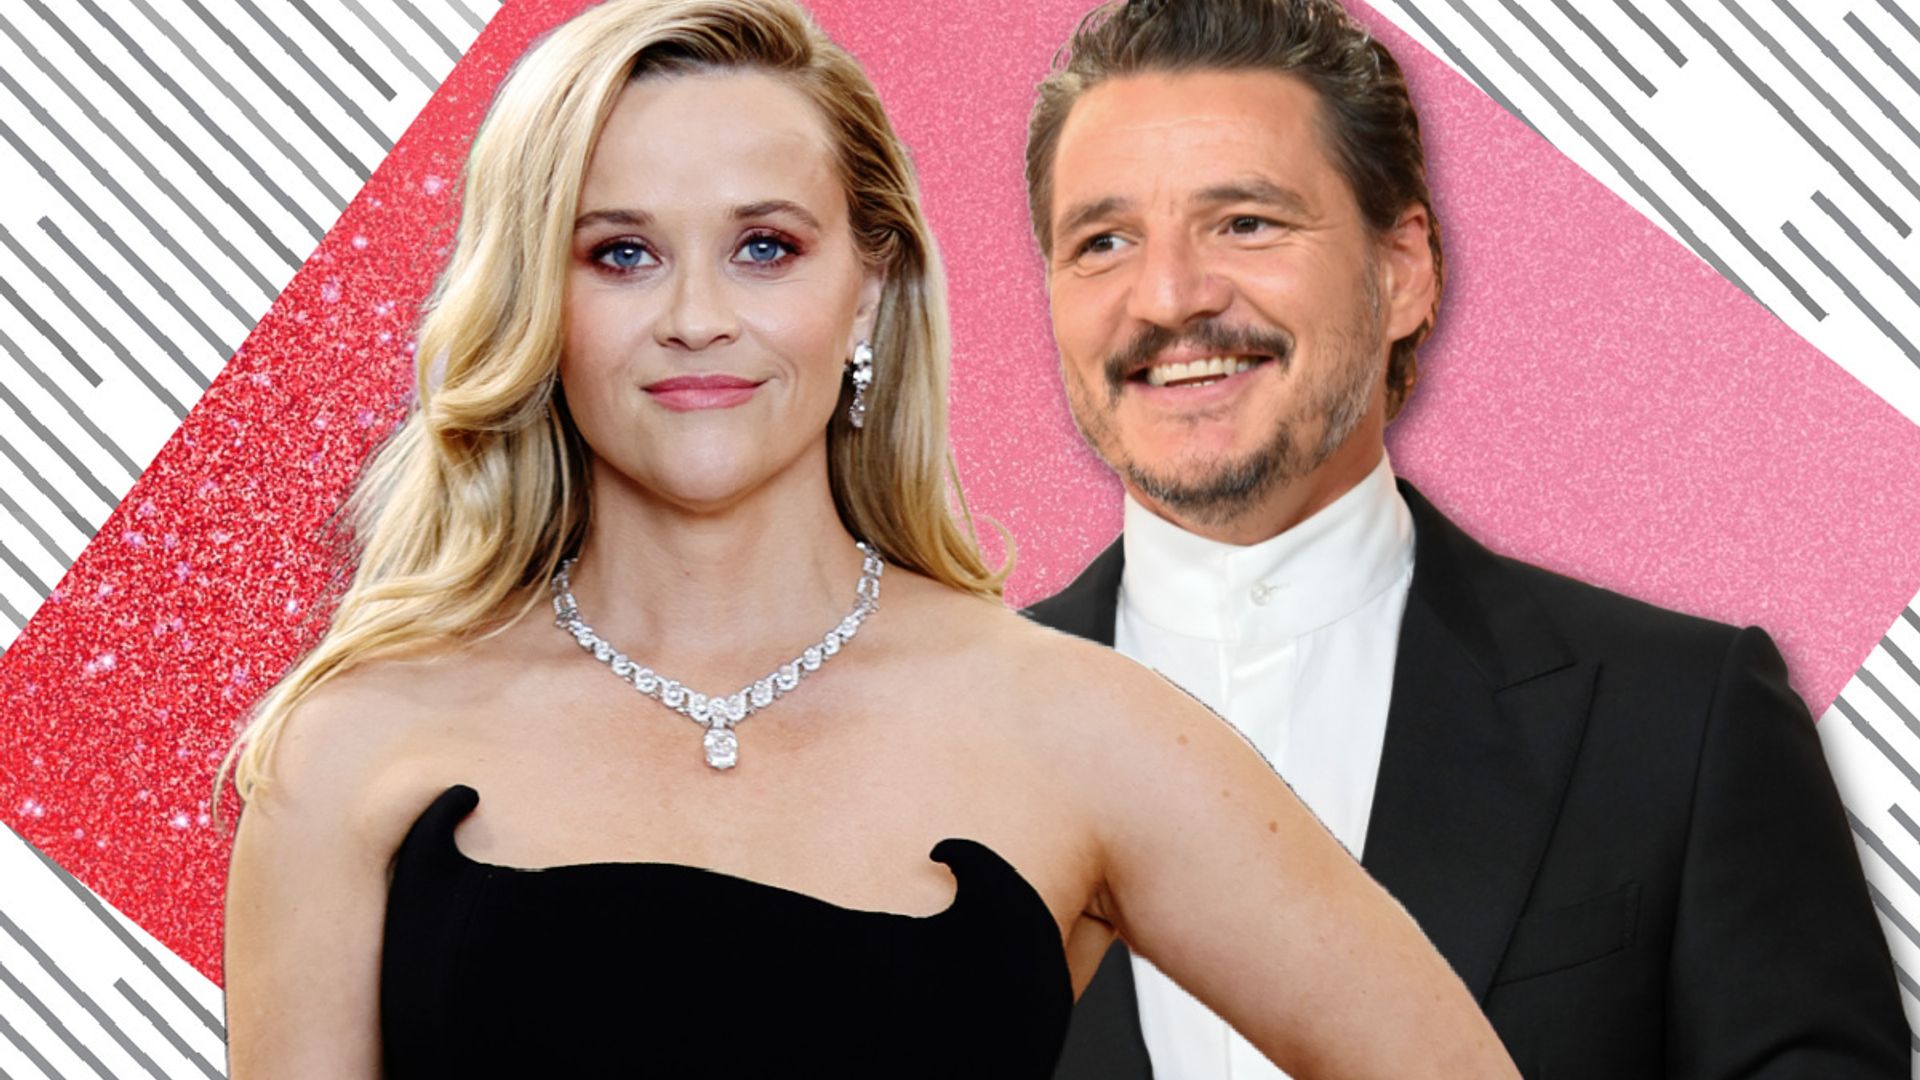 pedro pascal and reese witherspoon are fans of solawave